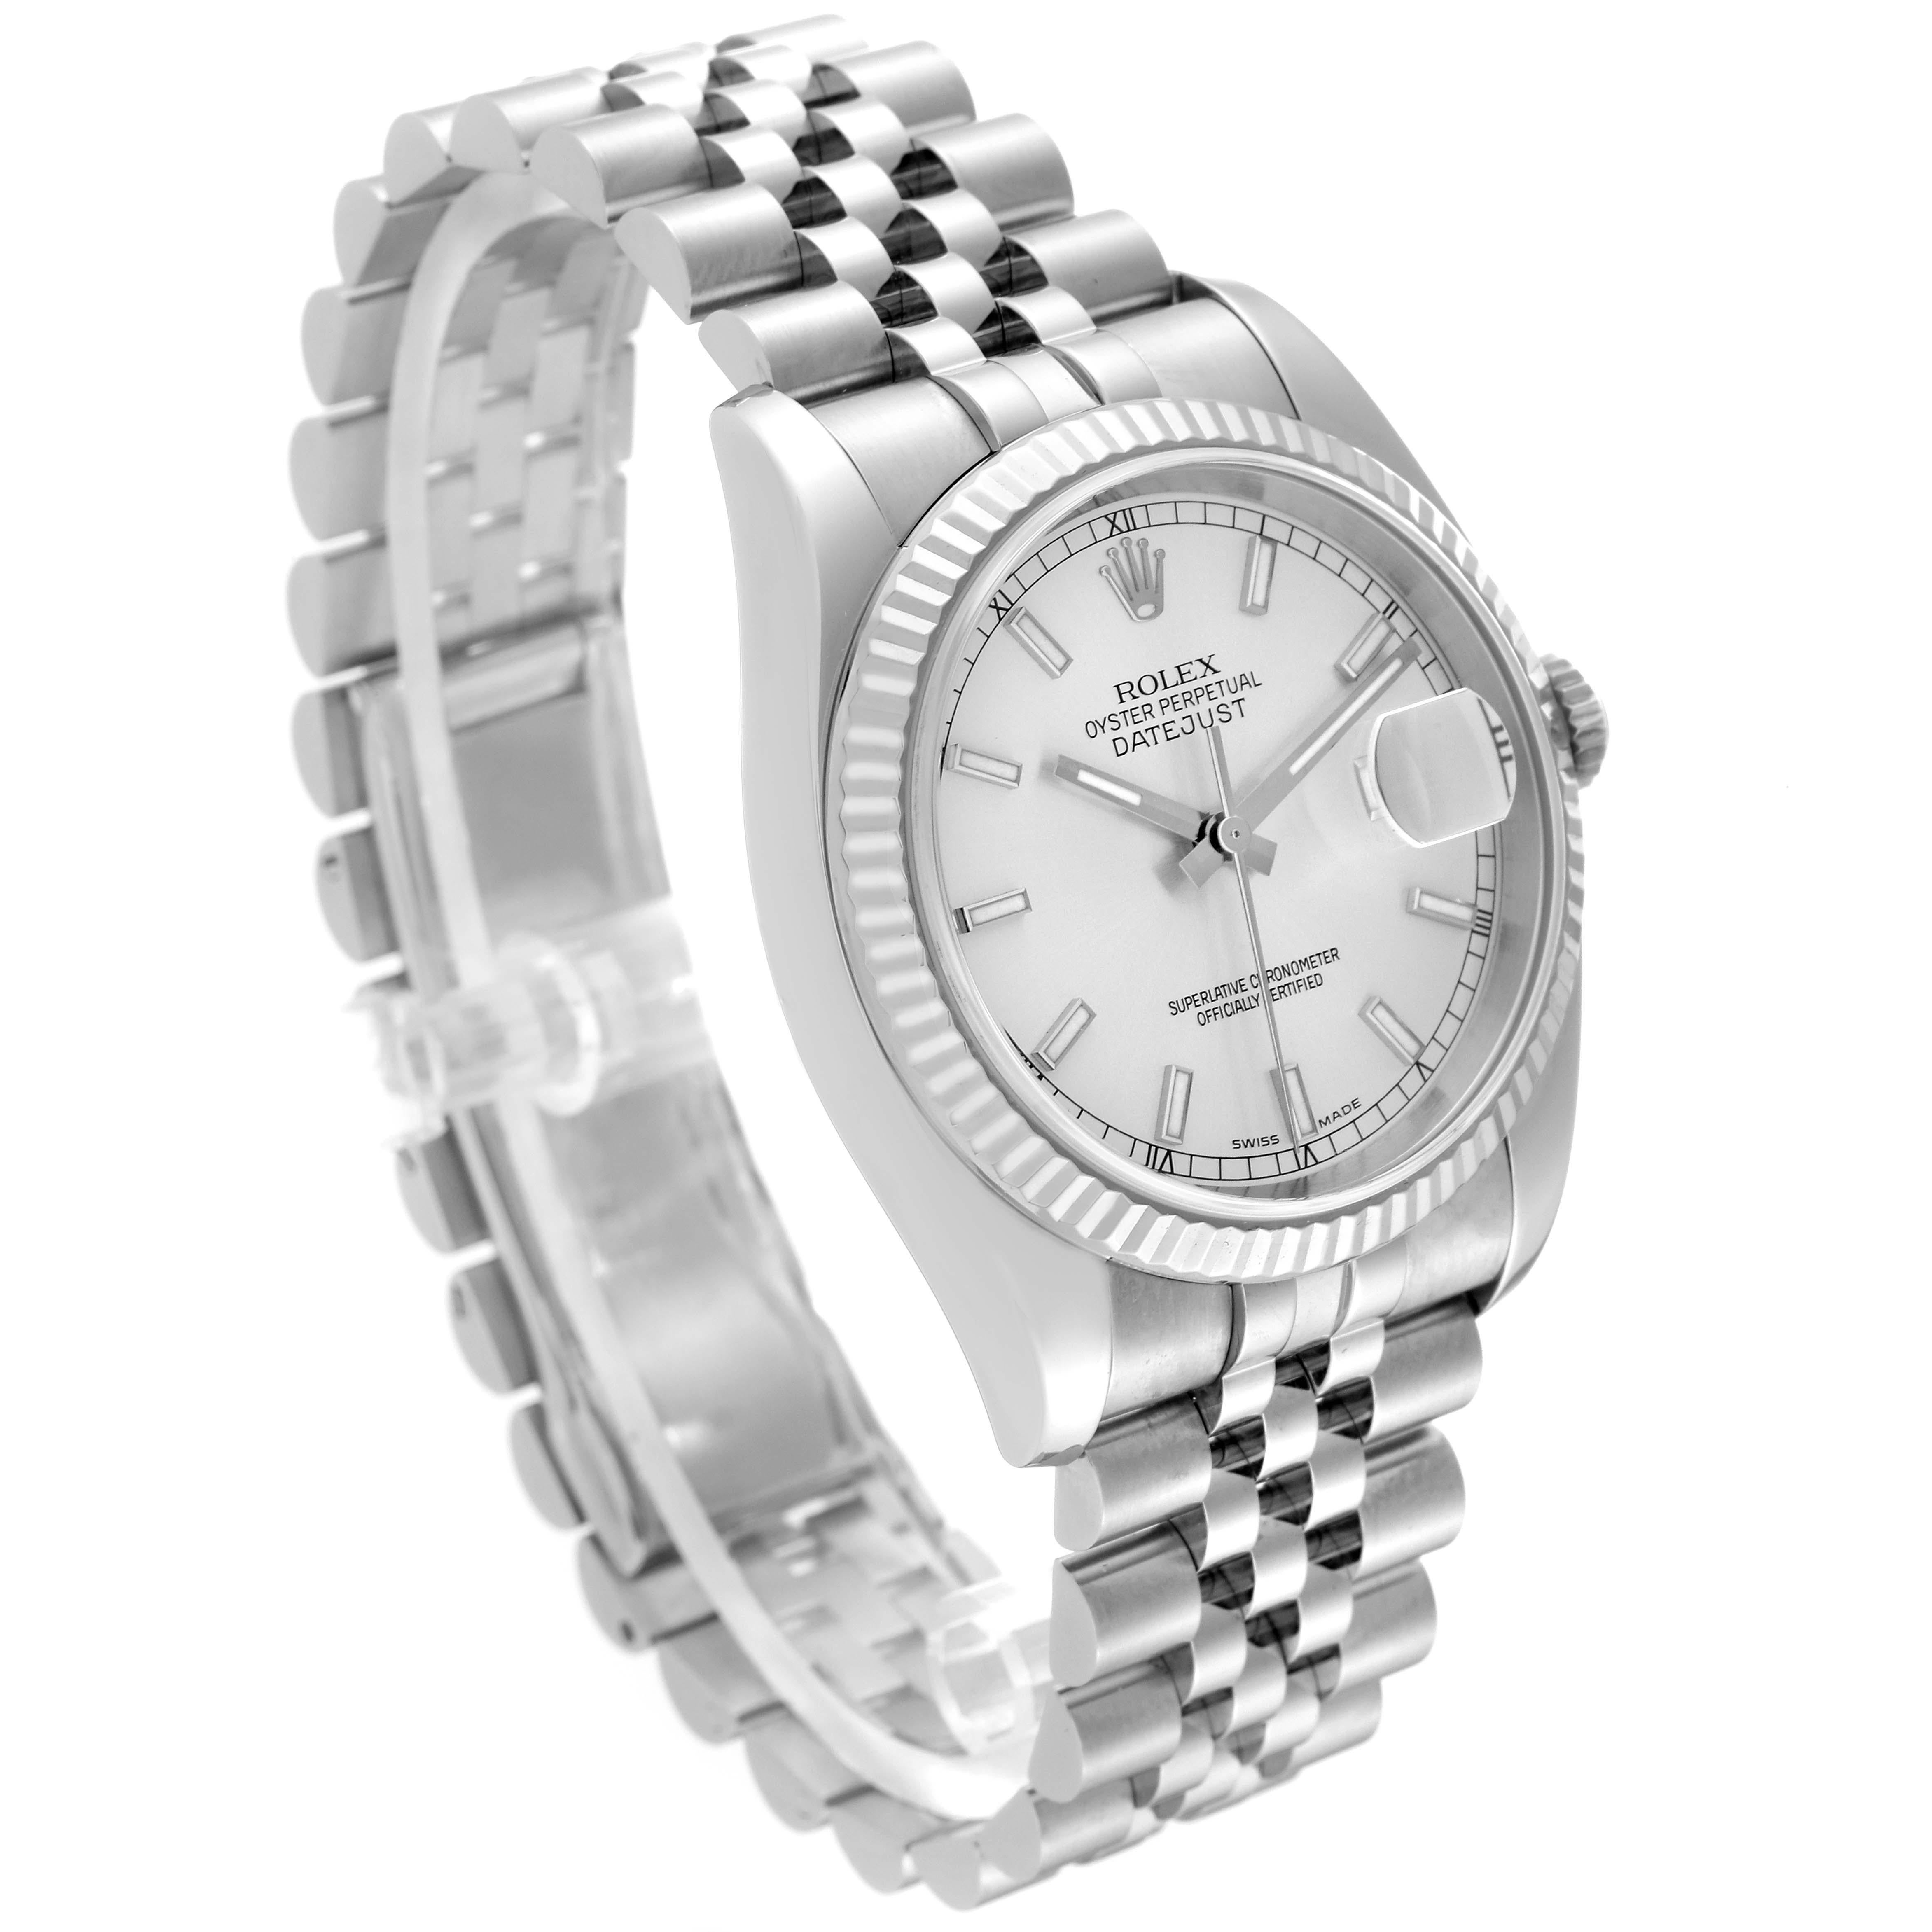 Rolex Datejust Steel White Gold Silver Dial Mens Watch 116234 Box Papers en vente 4